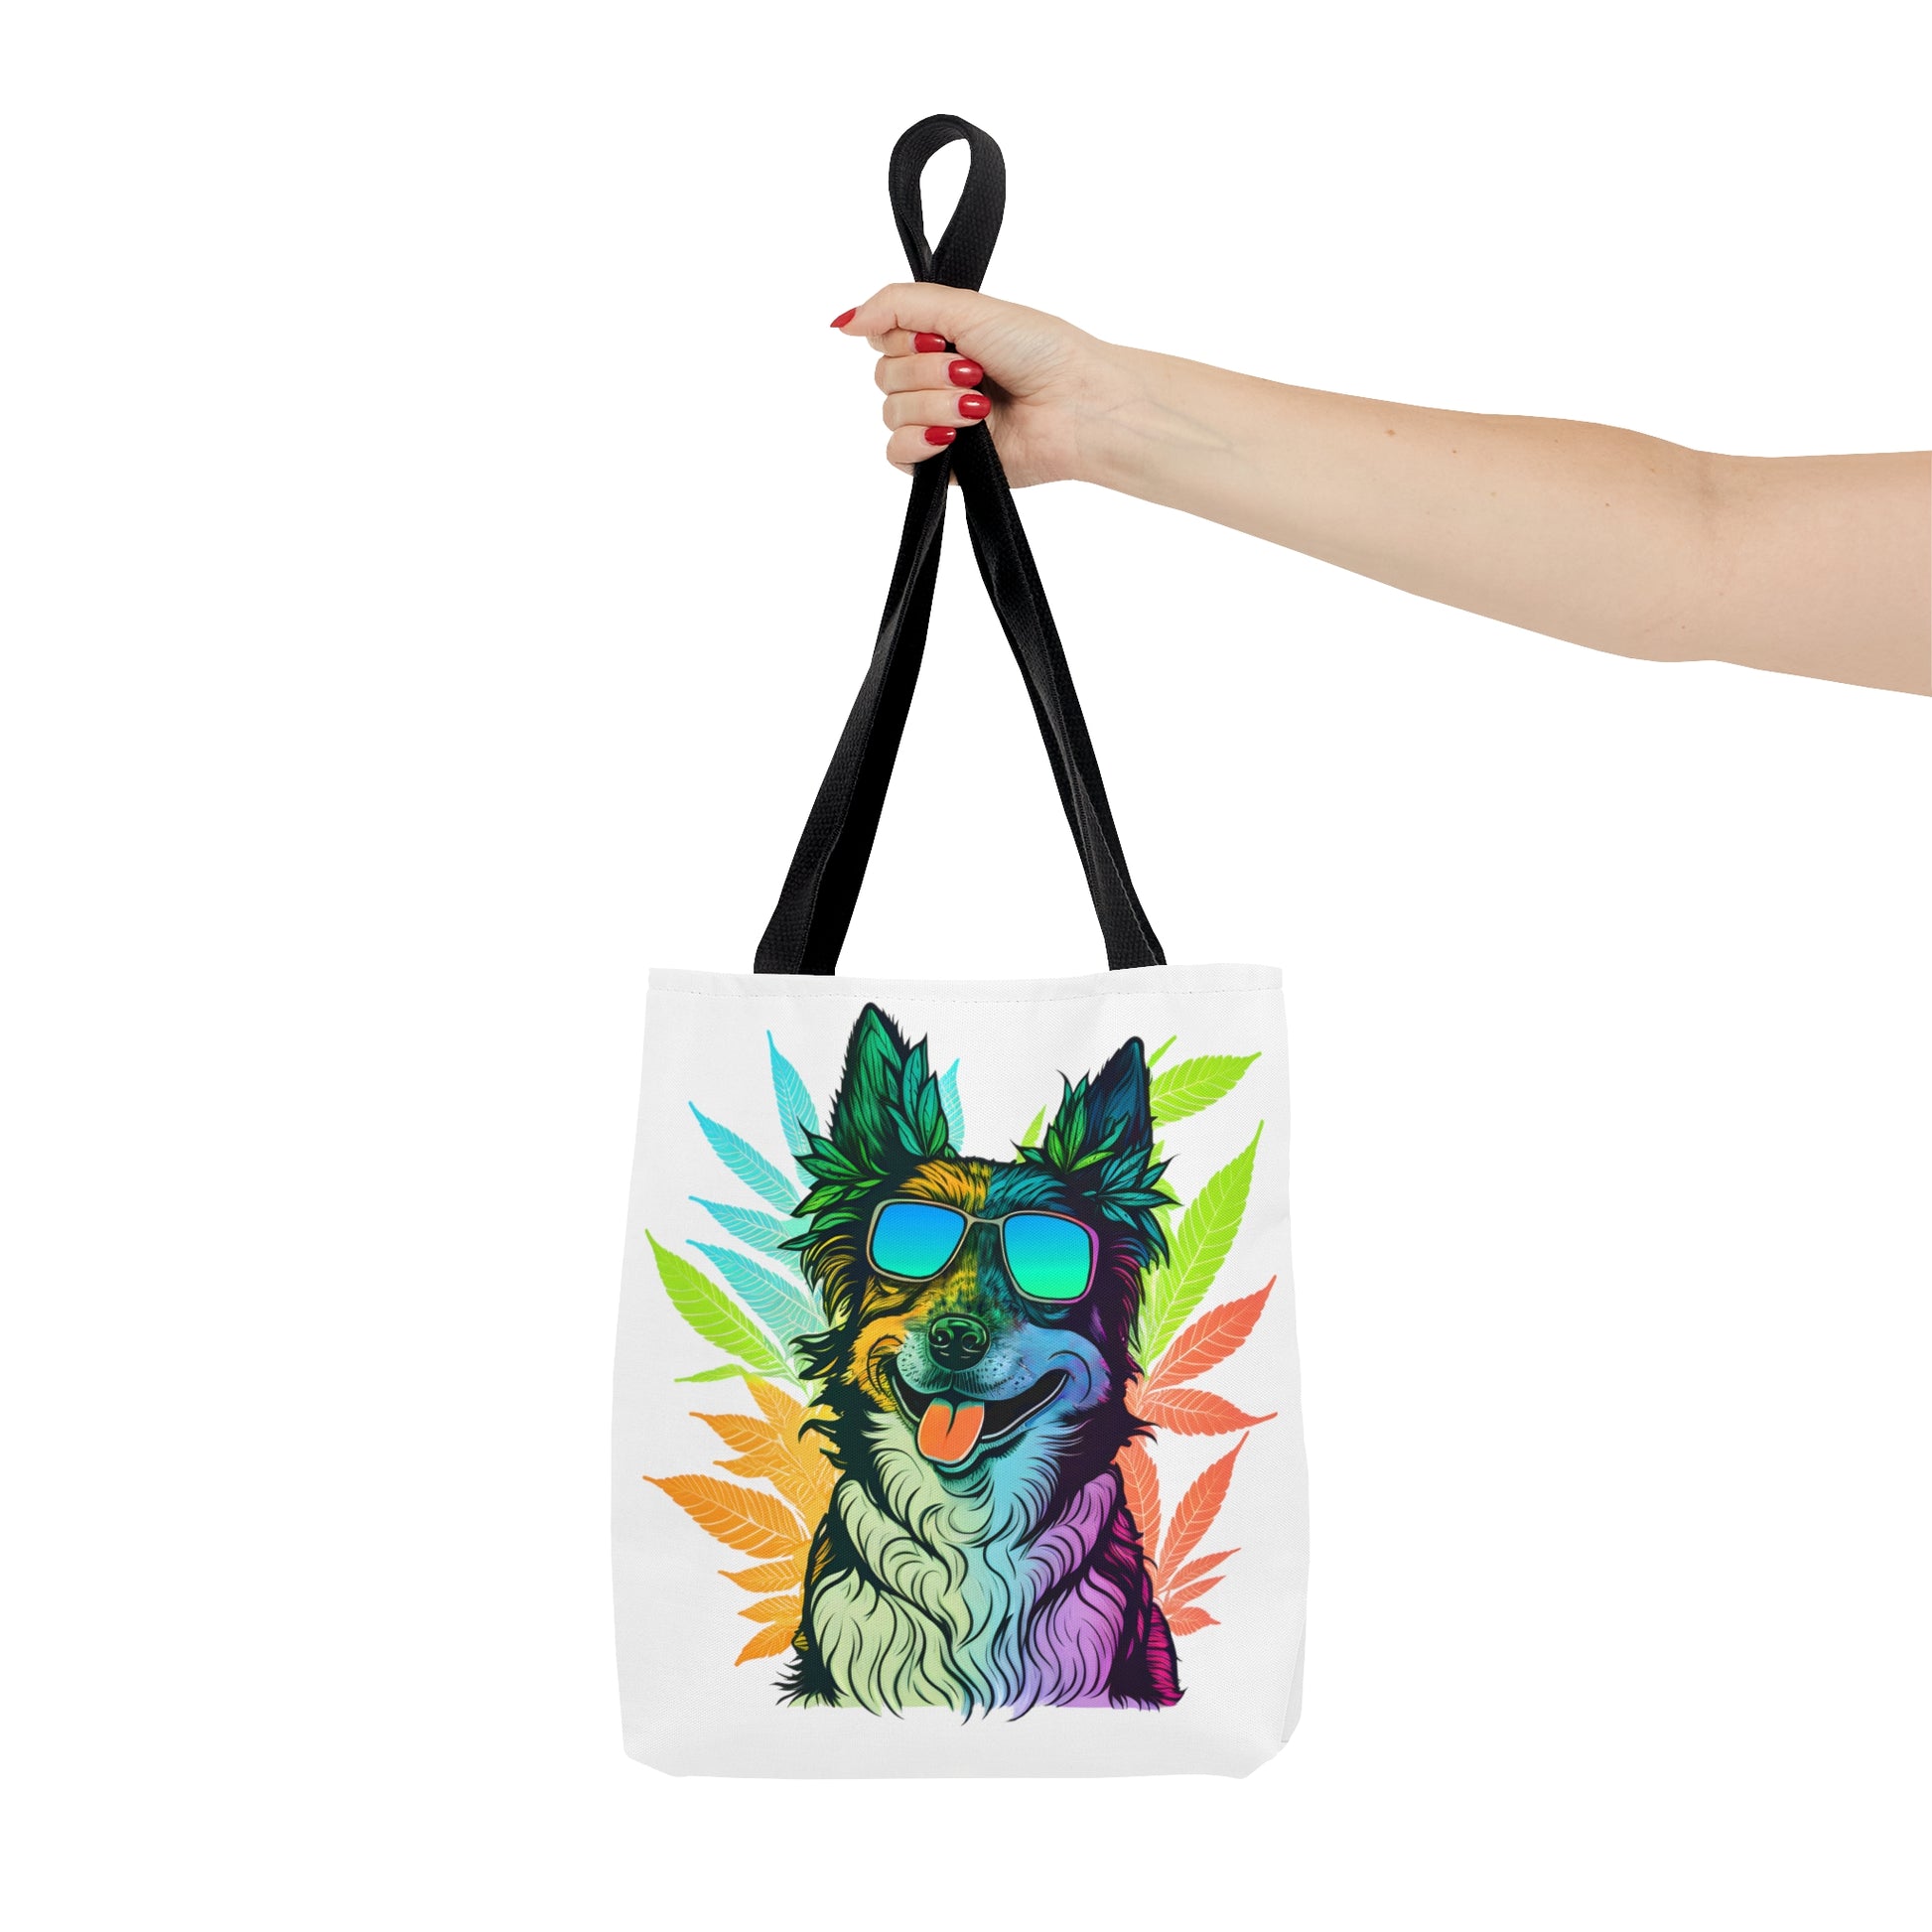 Cool Border Collie With Shades and Weed Tote Bag has vibrant explosive coloring that pops and represents the true culture of cannabis handbags